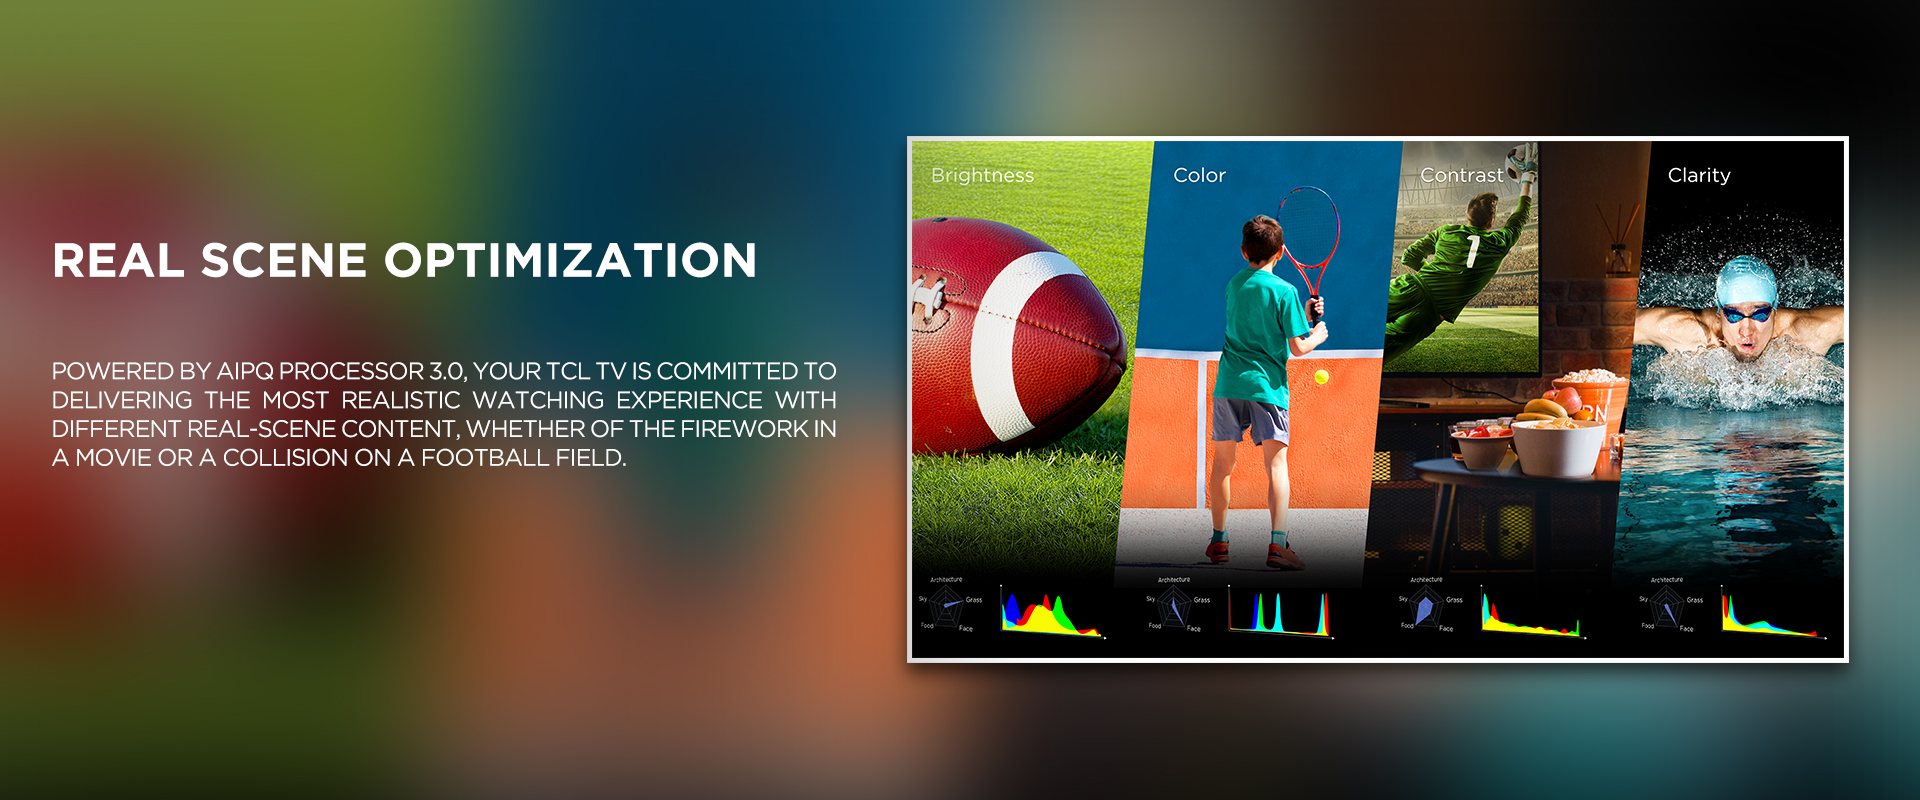 Real Scene Optimization - Real Scene Optimization - Powered by AiPQ PROCESSOR 3.0, your TCL TV is committed to delivering the most realistic watching experience with different real-scene content, whether of the firework in a movie or a collision on a football field.